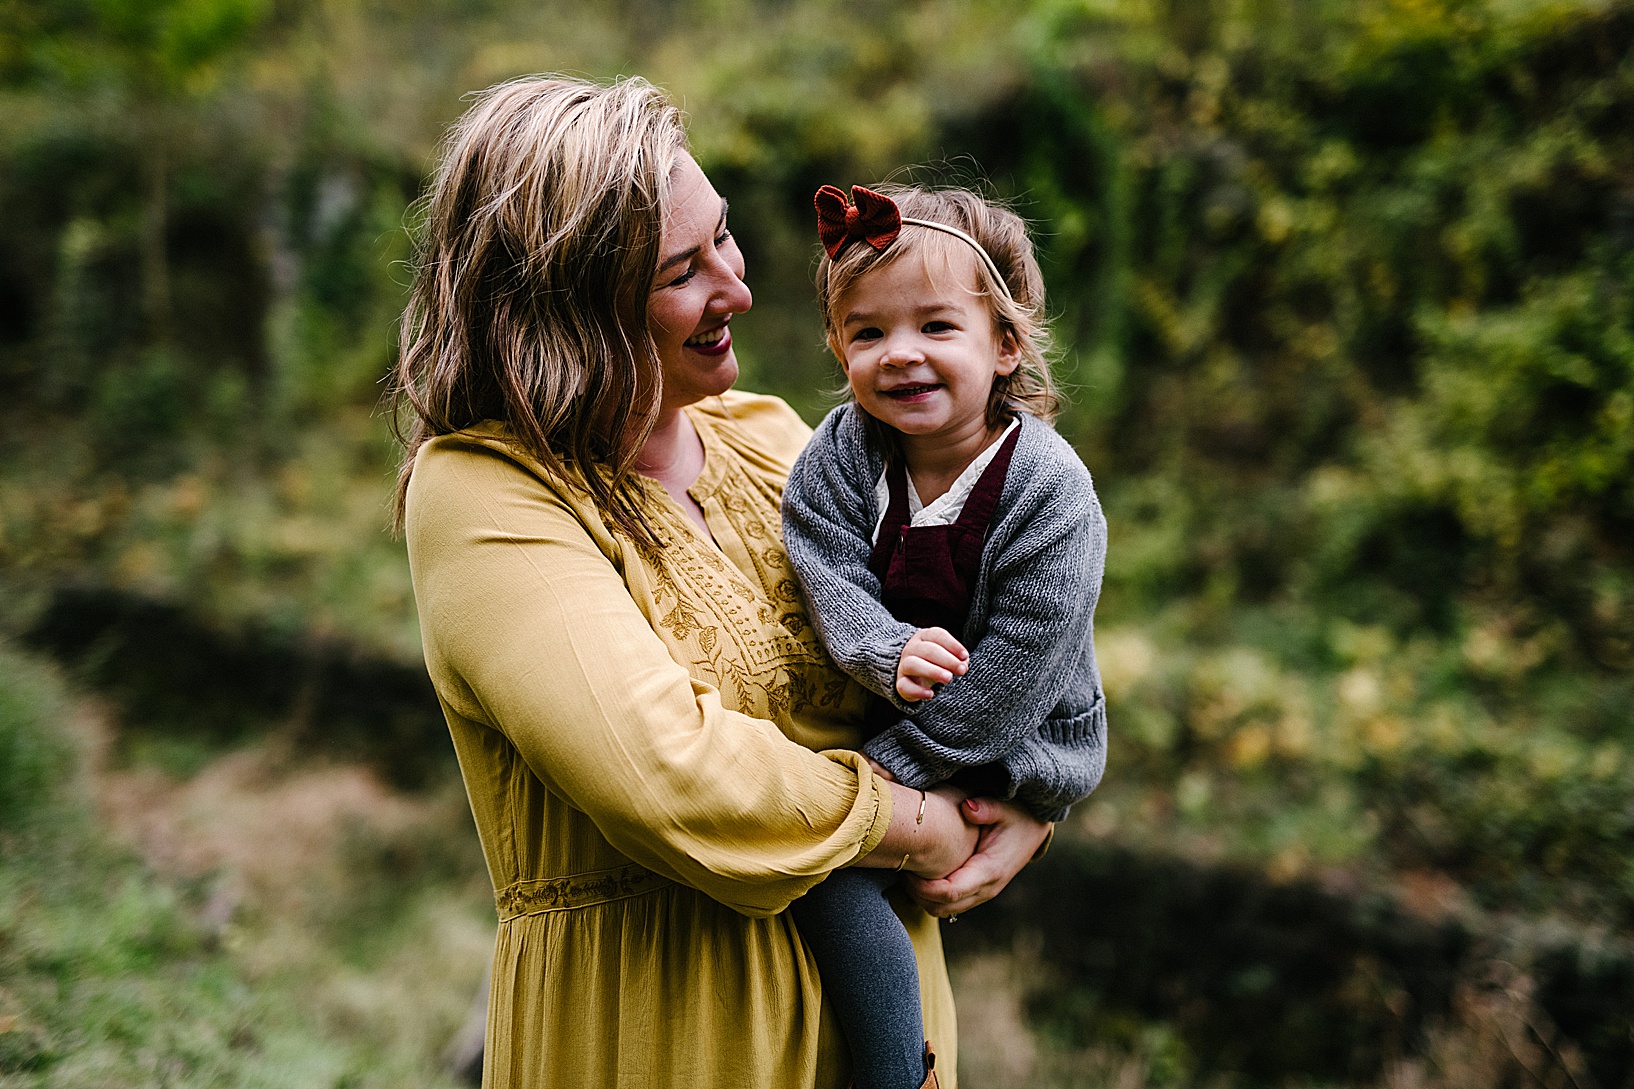 Blonde woman in a mustard dress smiles and looks at her daughter while she holds her in front of gorgeous greenery at the Leetonia Coke Ovens.